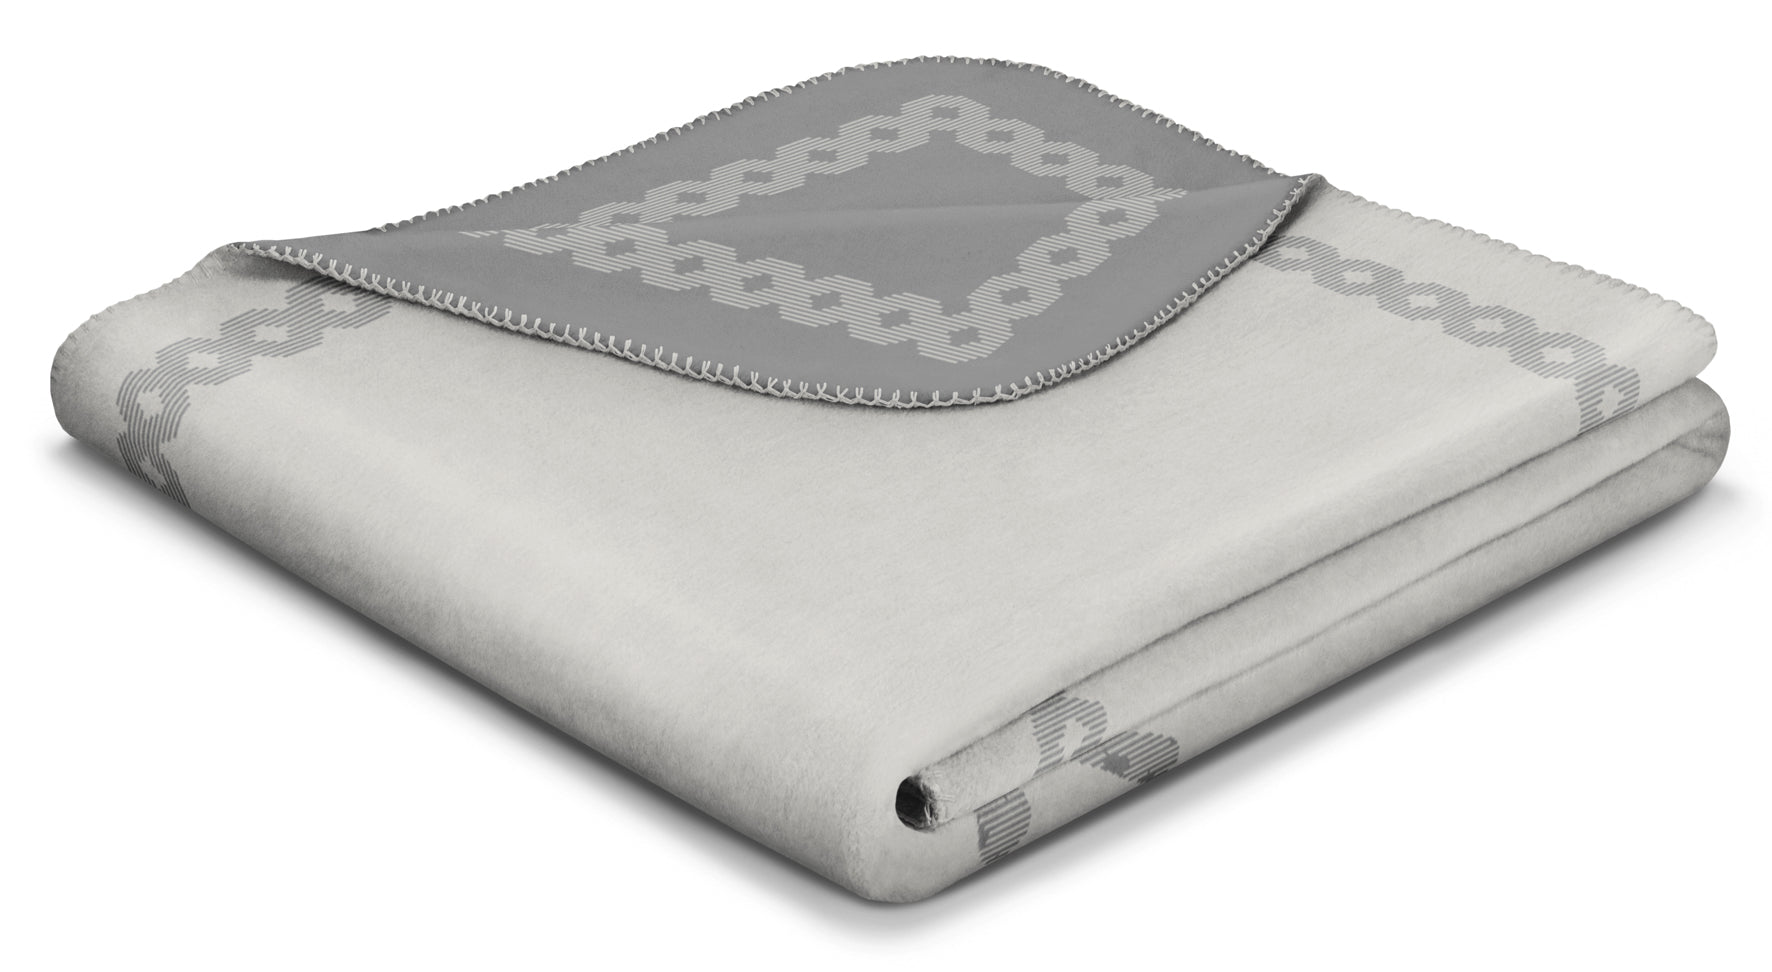 Folded Stag's Head Blanket in shades of grey with geometric patterned boarder.